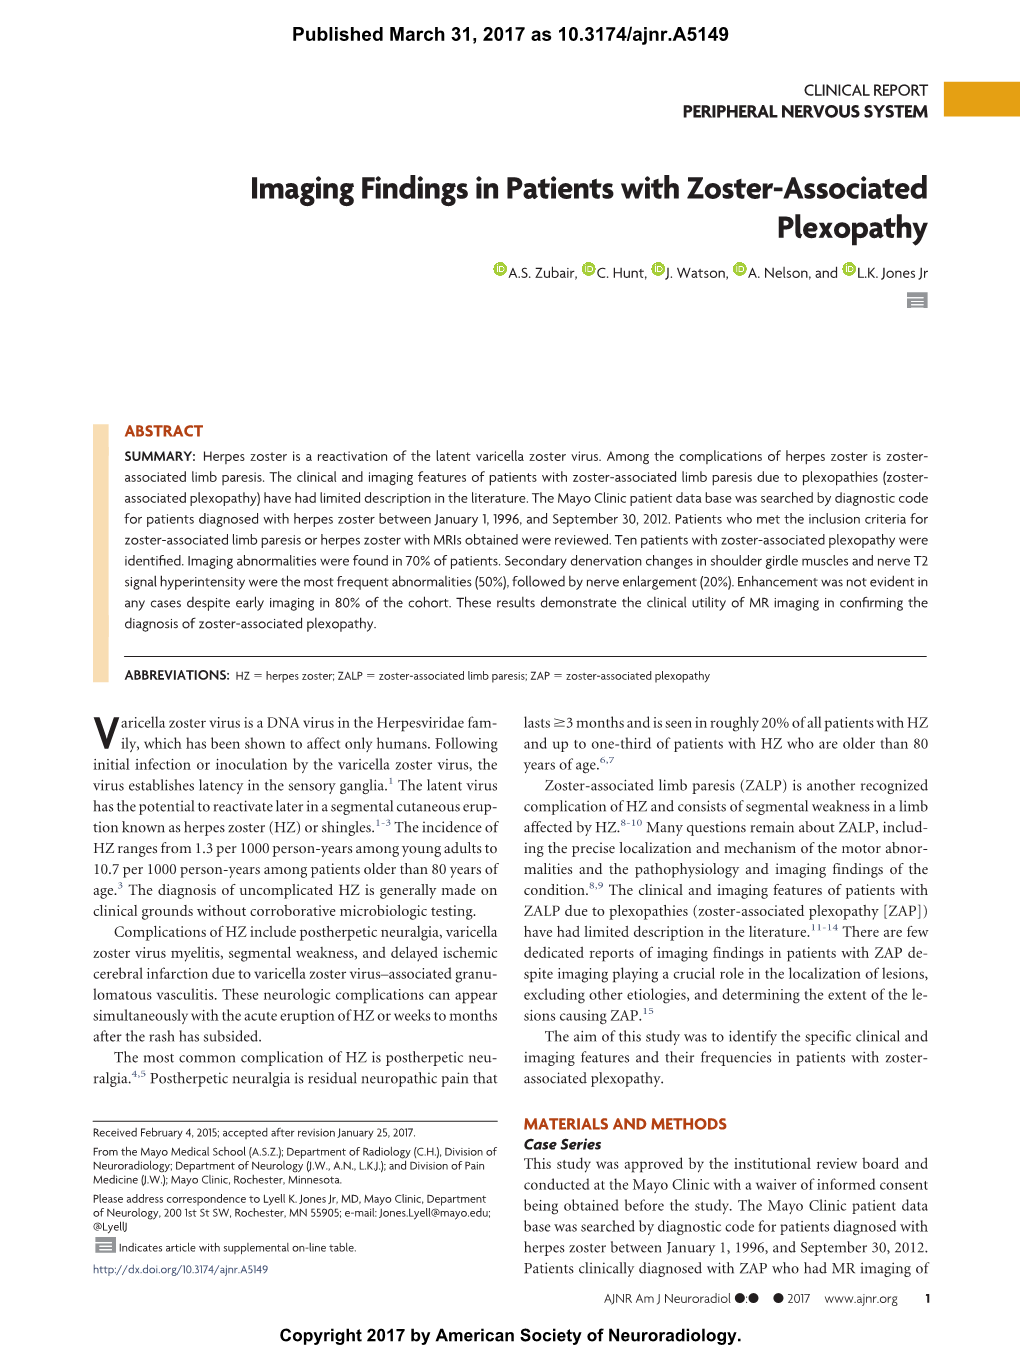 Imaging Findings in Patients with Zoster-Associated Plexopathy